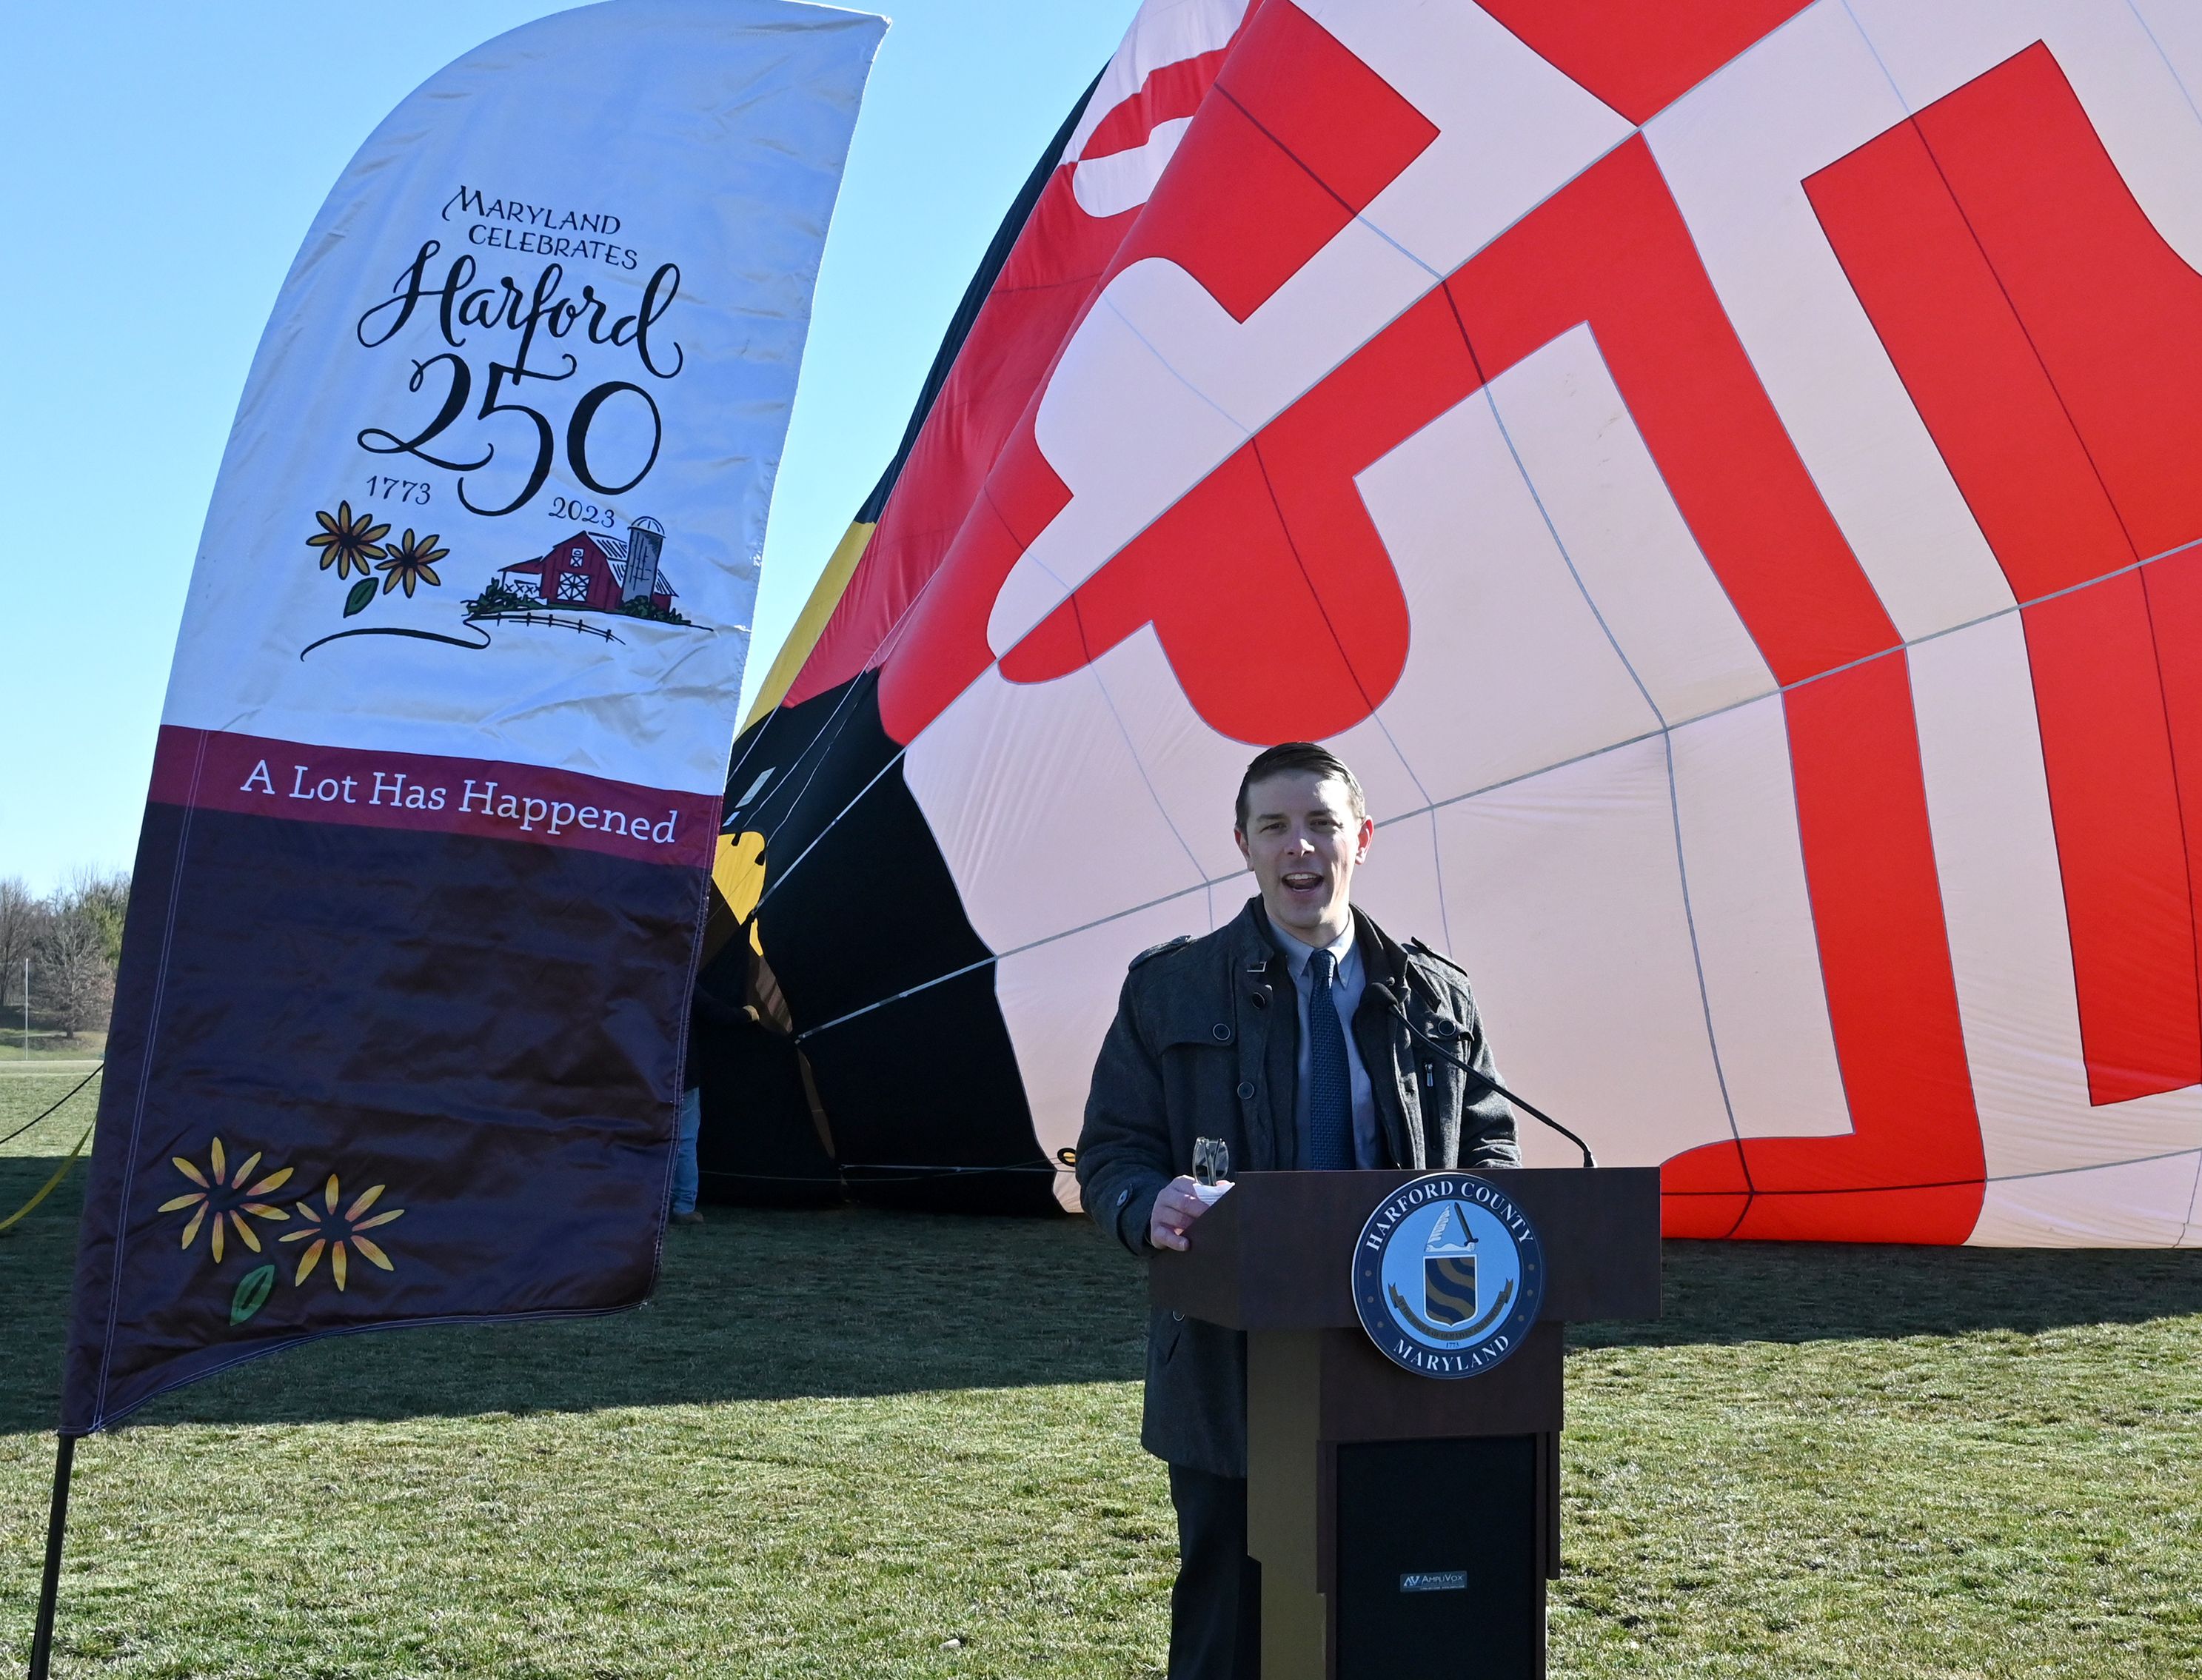 Chesapeake Bay Balloon Festival moves from Maryland to central Pa.